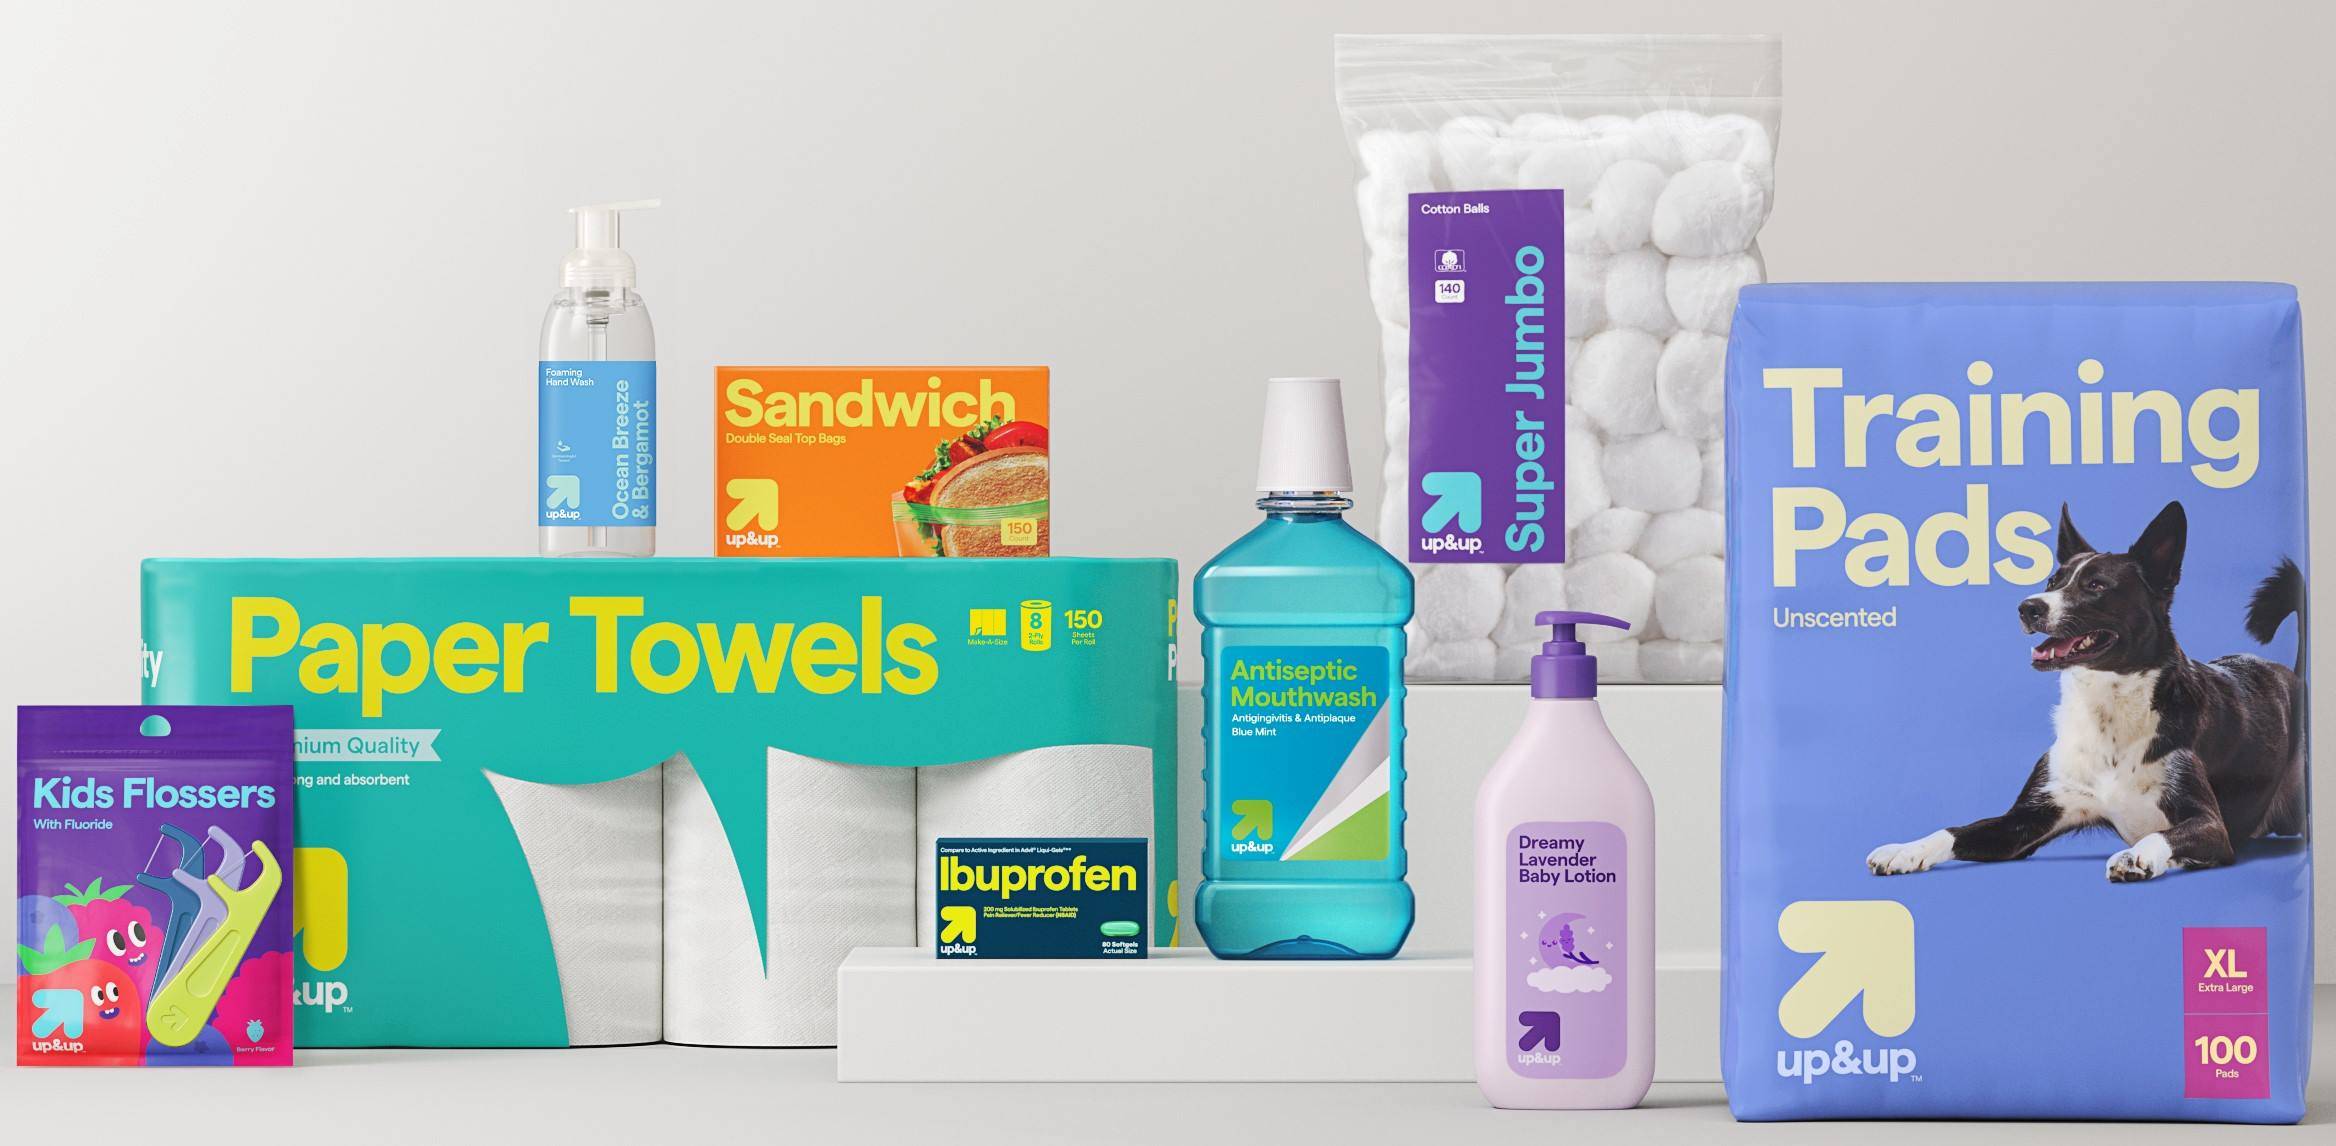 Target redesigned packaging for its up&up brand of everyday essentials